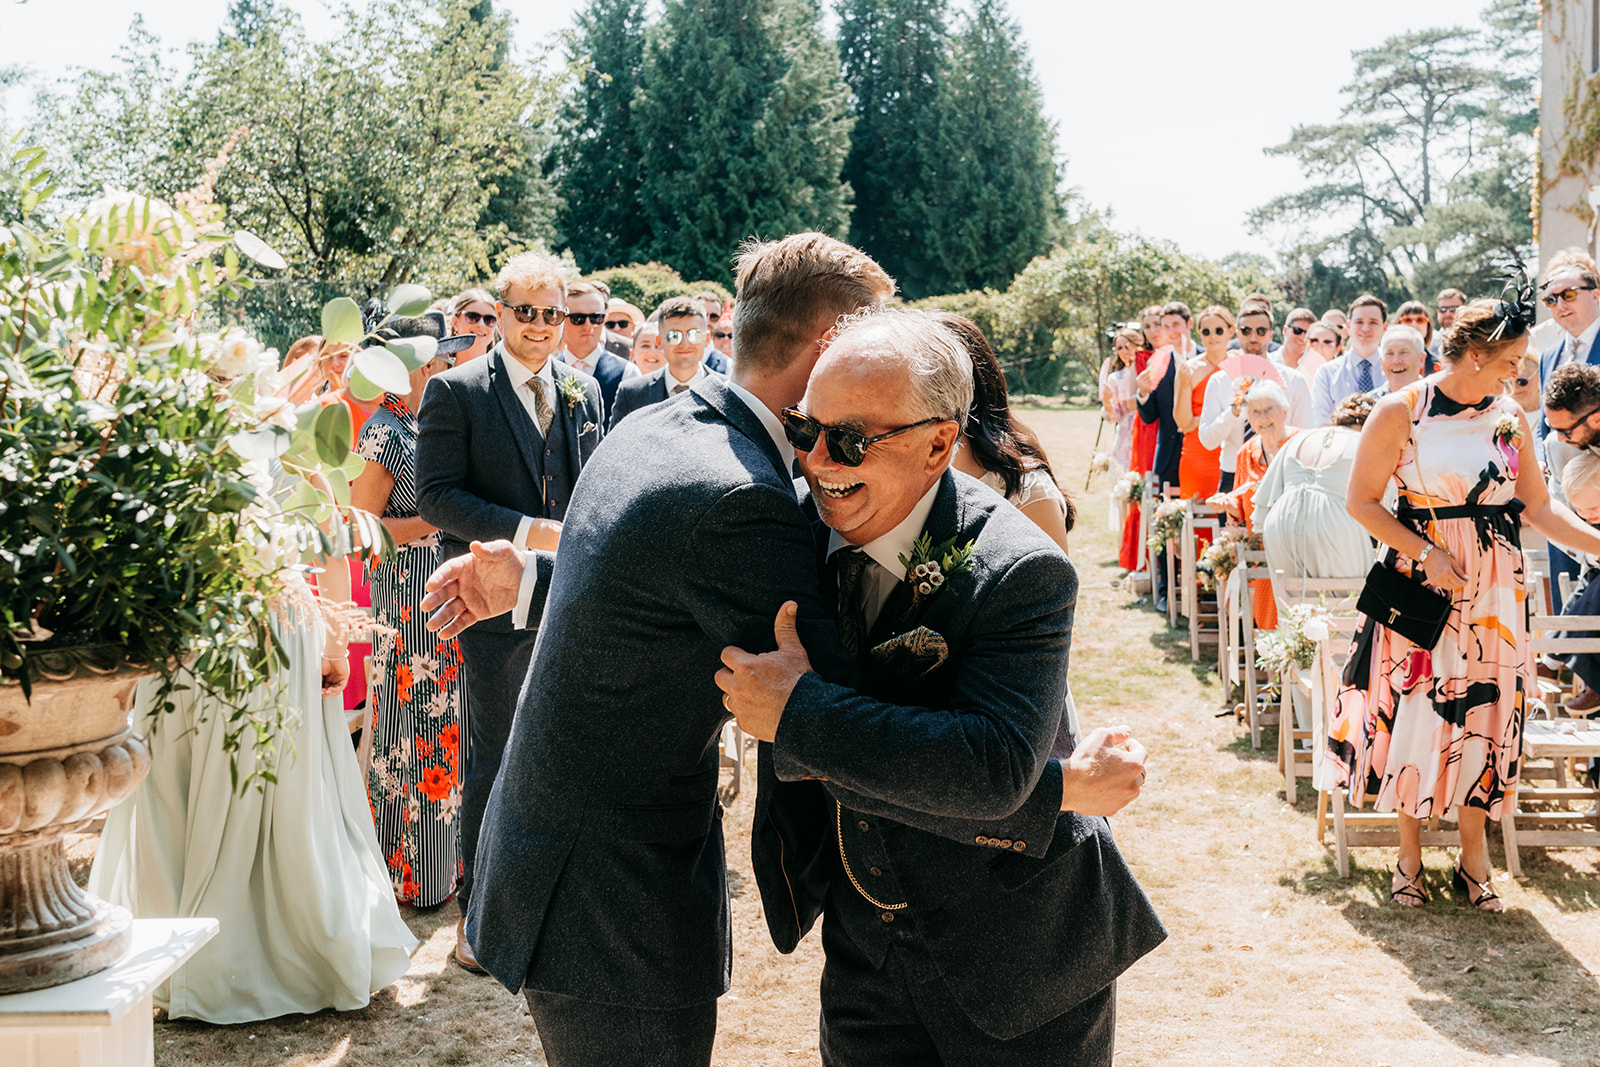 The brides father giving the groom a hug before giving his daughter away 